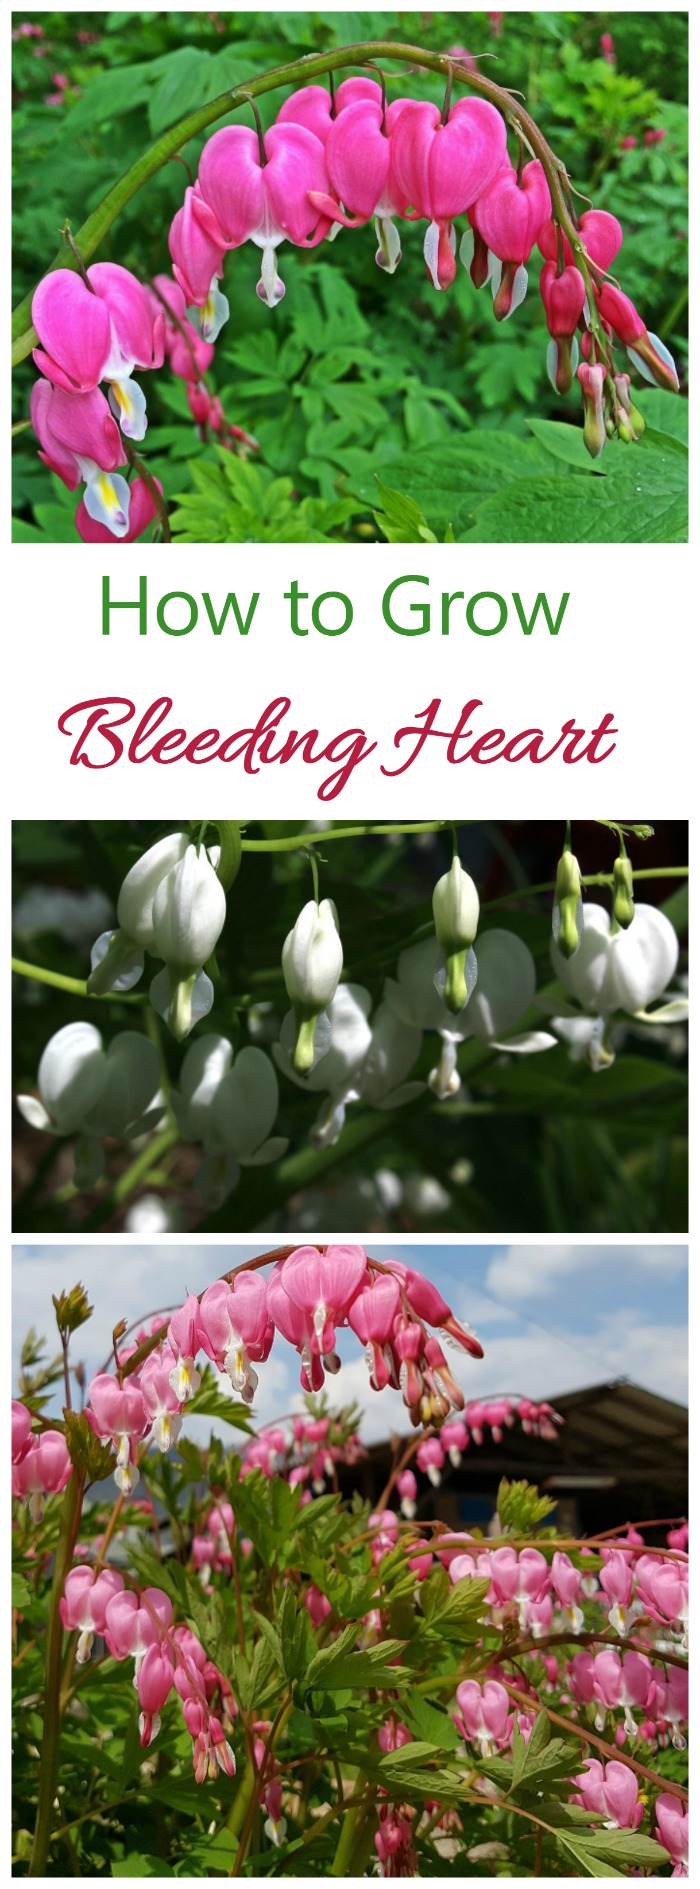 The flowers of an old fashioned bleeding heart are the ultimate in romance. The plant is perennial and easy to grow if you keep just a few things in mind.